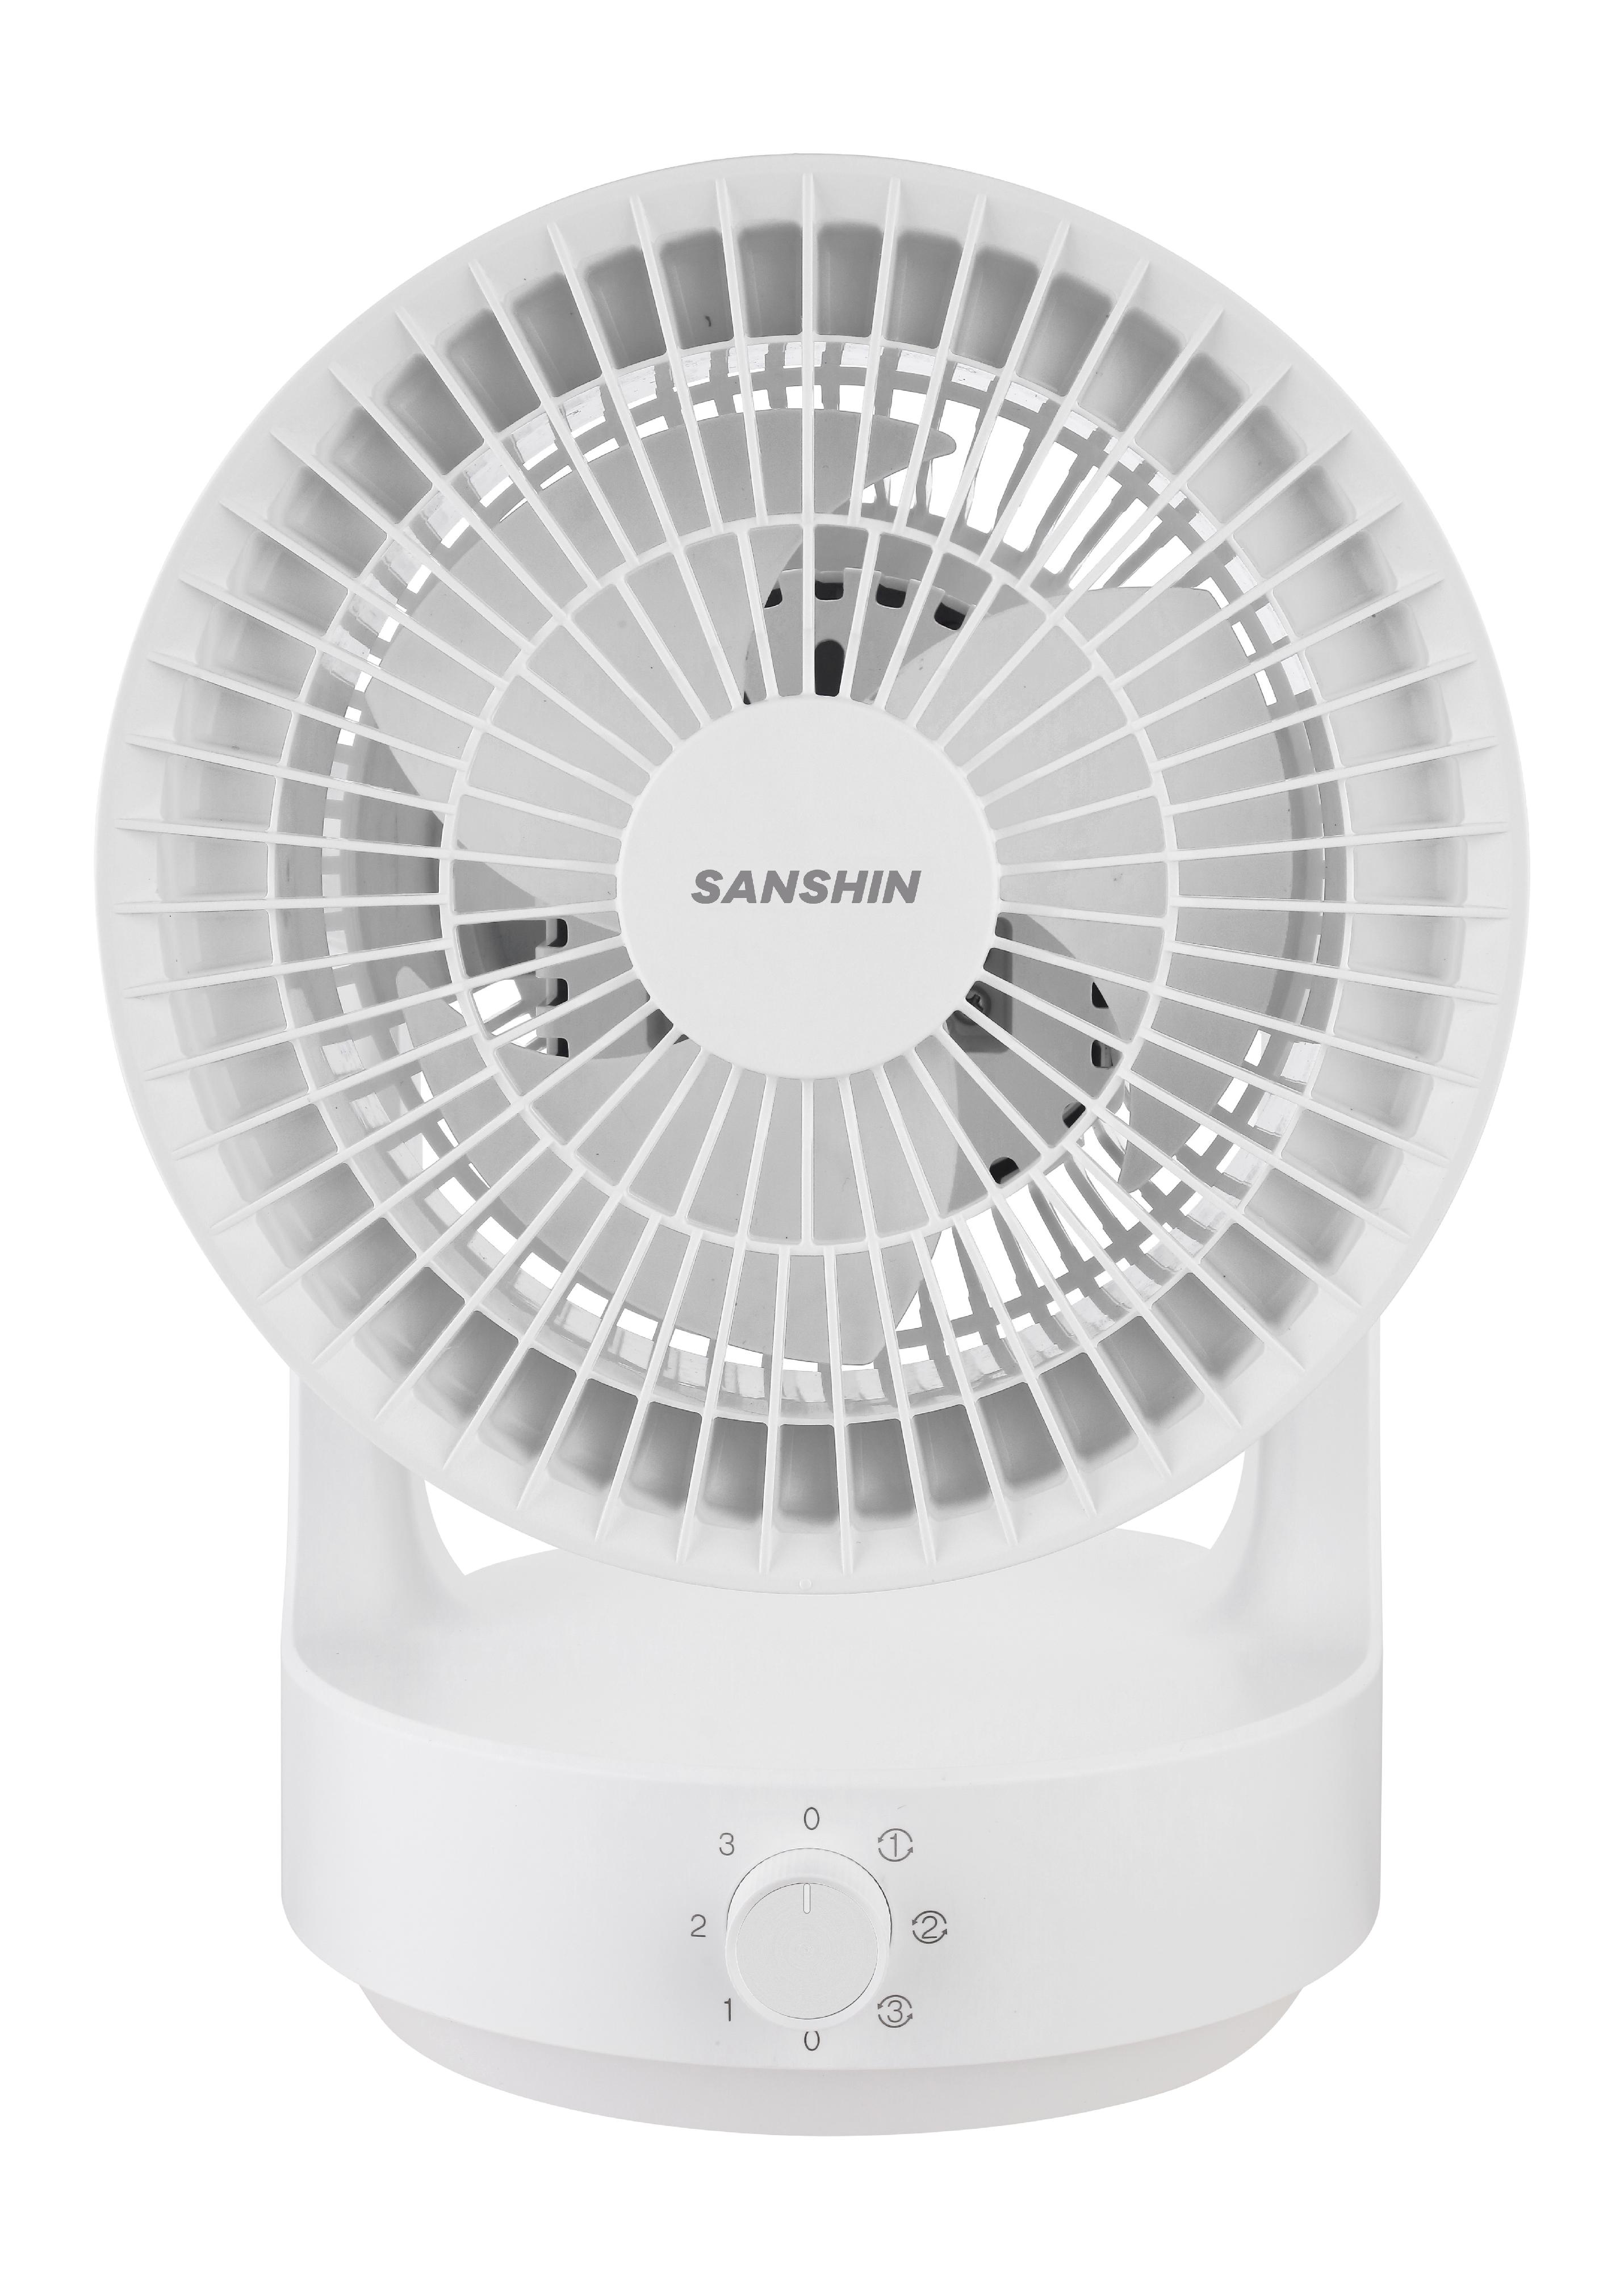 The Electrical and Mechanical Services Department today (June 14) urged the public to stop using a model of a Sanshin air circulator fan with the model number SCF0619. Photo shows the air circulator fan model.